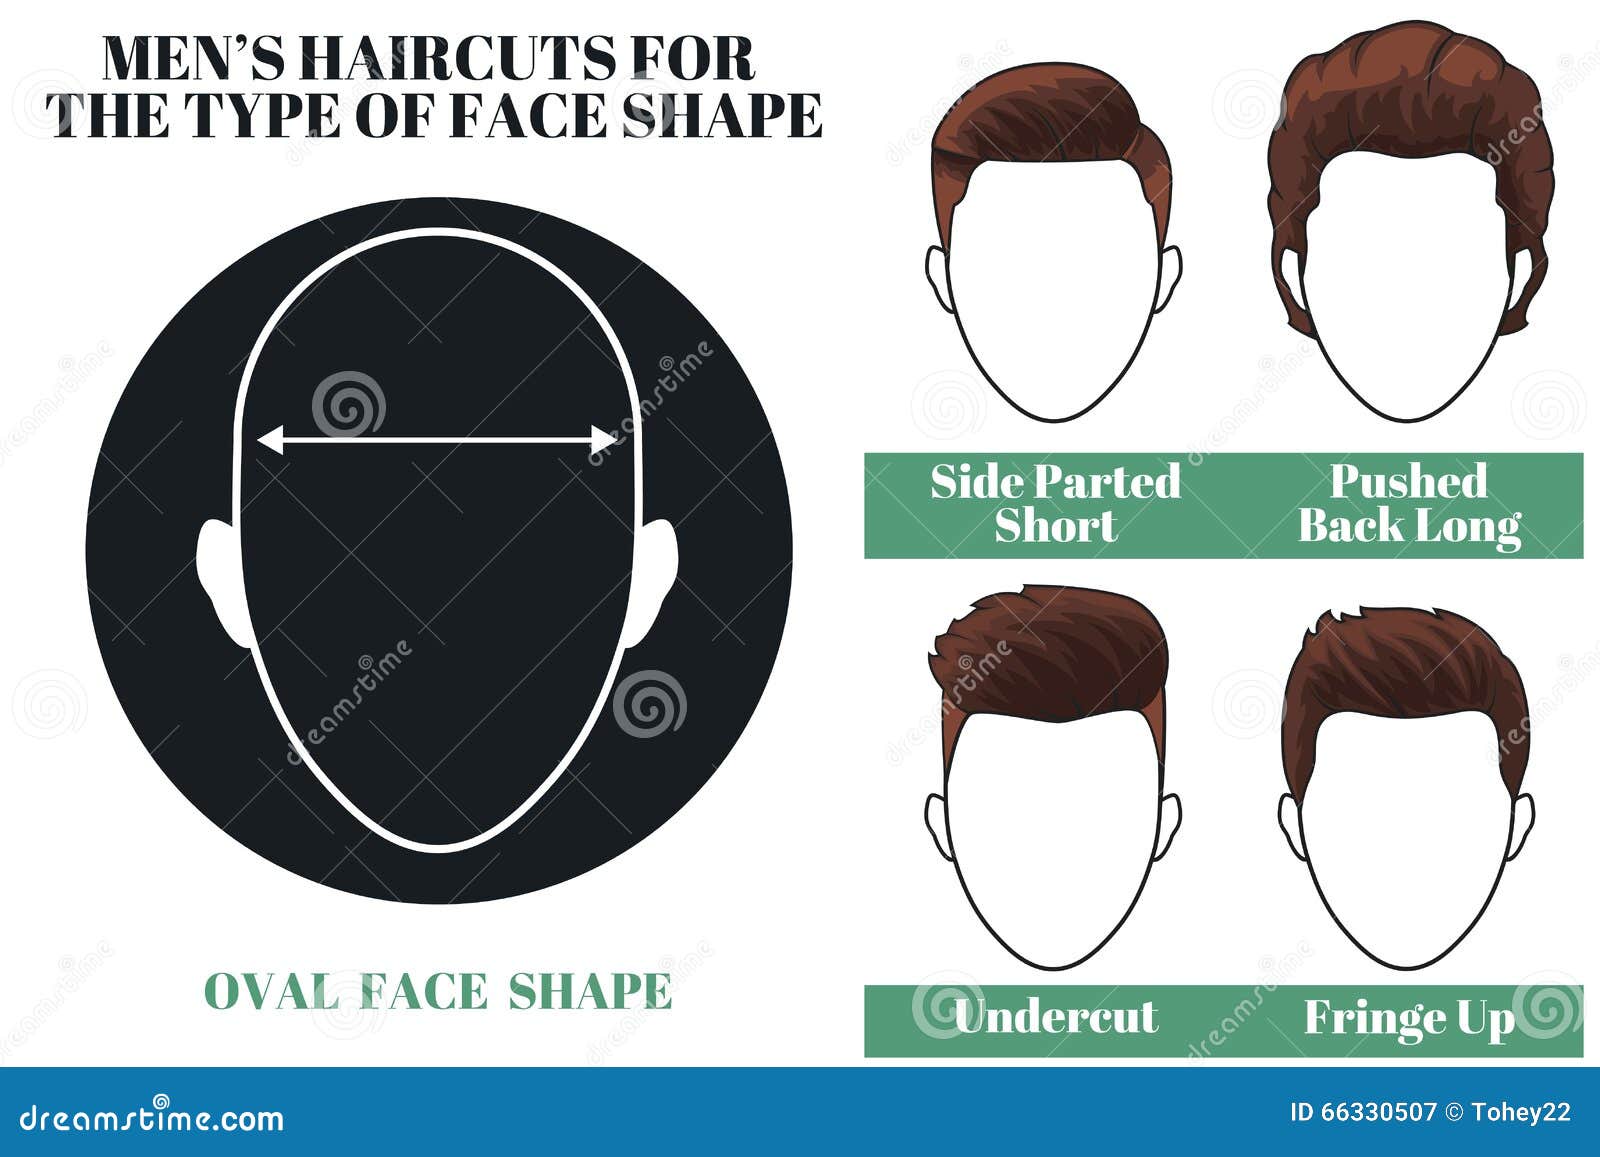 Hairstyles for OVAL FACE SHAPE | Haircut Tutorial | Beardstyles for oval  face shape #faceshape - YouTube